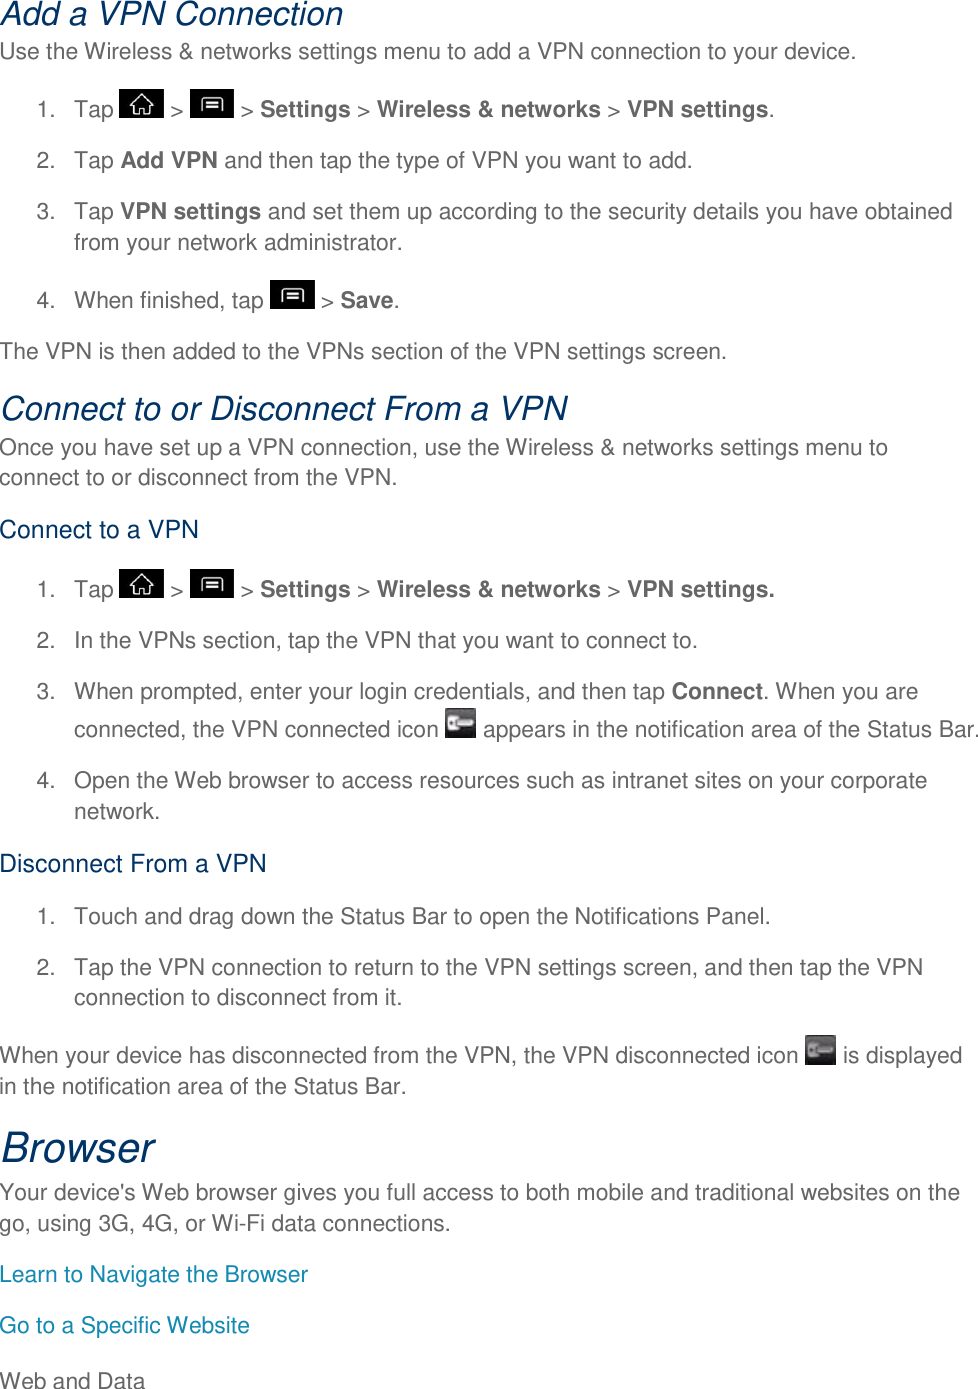 Web and Data     Add a VPN Connection Use the Wireless &amp; networks settings menu to add a VPN connection to your device. 1.  Tap   &gt;   &gt; Settings &gt; Wireless &amp; networks &gt; VPN settings. 2.  Tap Add VPN and then tap the type of VPN you want to add. 3.  Tap VPN settings and set them up according to the security details you have obtained from your network administrator. 4.  When finished, tap   &gt; Save. The VPN is then added to the VPNs section of the VPN settings screen. Connect to or Disconnect From a VPN  Once you have set up a VPN connection, use the Wireless &amp; networks settings menu to connect to or disconnect from the VPN. Connect to a VPN 1.  Tap   &gt;   &gt; Settings &gt; Wireless &amp; networks &gt; VPN settings. 2.  In the VPNs section, tap the VPN that you want to connect to. 3.  When prompted, enter your login credentials, and then tap Connect. When you are connected, the VPN connected icon   appears in the notification area of the Status Bar. 4.  Open the Web browser to access resources such as intranet sites on your corporate network. Disconnect From a VPN 1.  Touch and drag down the Status Bar to open the Notifications Panel. 2.  Tap the VPN connection to return to the VPN settings screen, and then tap the VPN connection to disconnect from it. When your device has disconnected from the VPN, the VPN disconnected icon   is displayed in the notification area of the Status Bar. Browser Your device&apos;s Web browser gives you full access to both mobile and traditional websites on the go, using 3G, 4G, or Wi-Fi data connections. Learn to Navigate the Browser Go to a Specific Website 